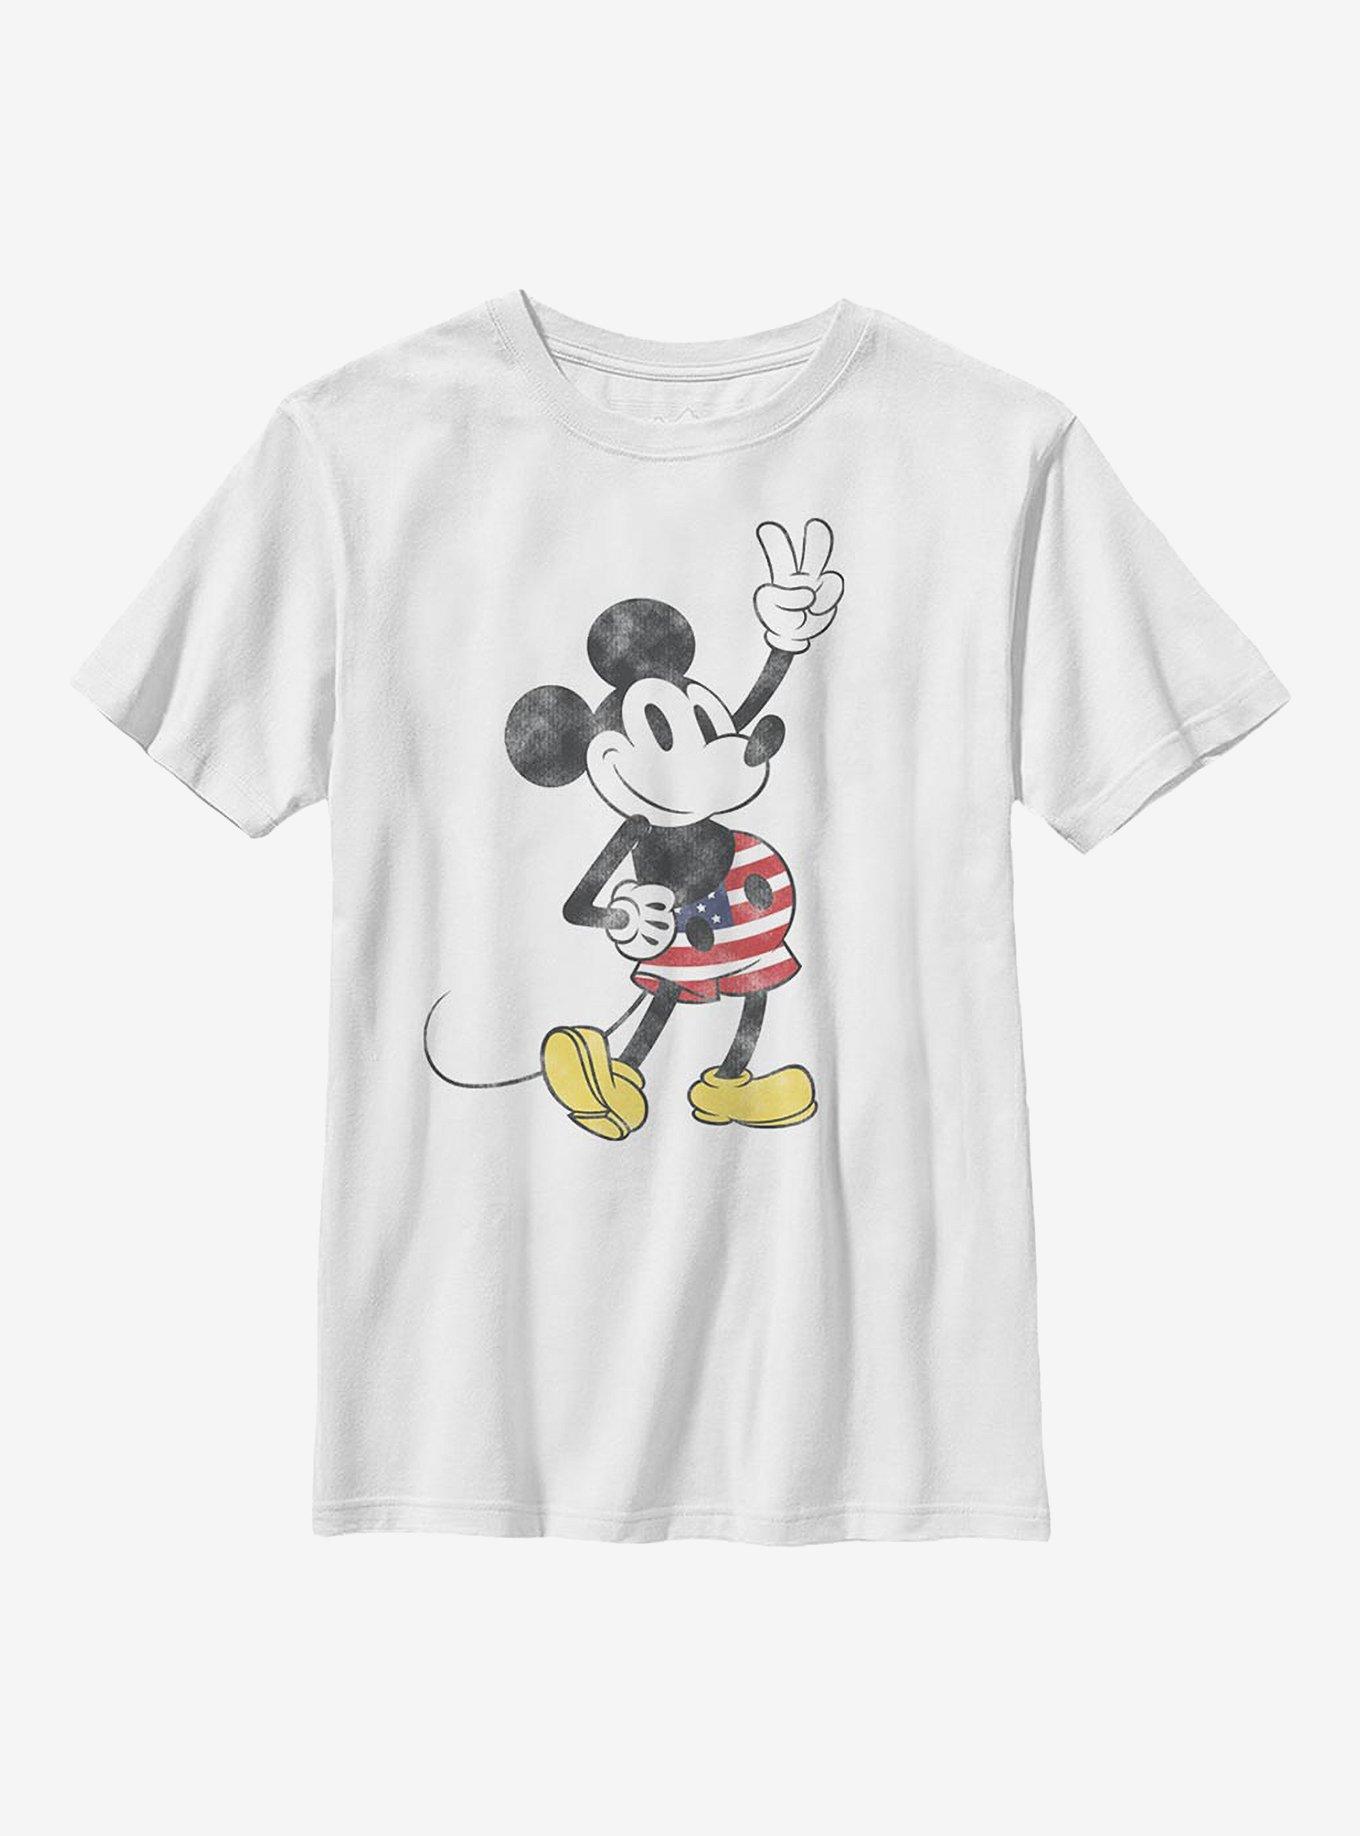 Disney Mickey Mouse American Mouse Youth T-Shirt, WHITE, hi-res